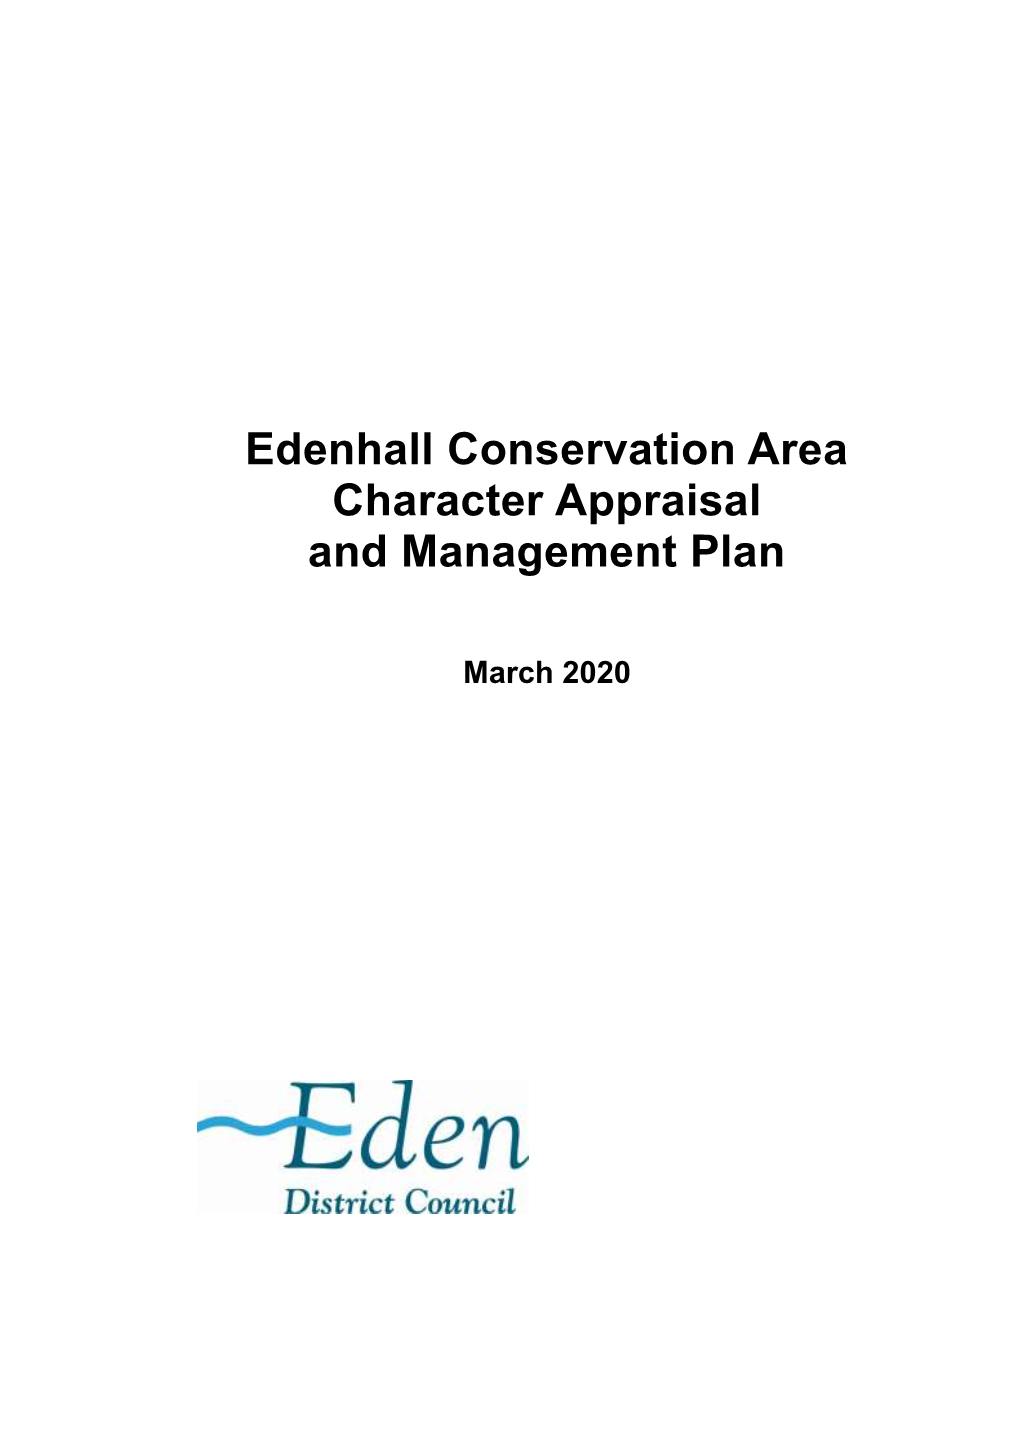 Edenhall Conservation Area Character Appraisal and Management Plan